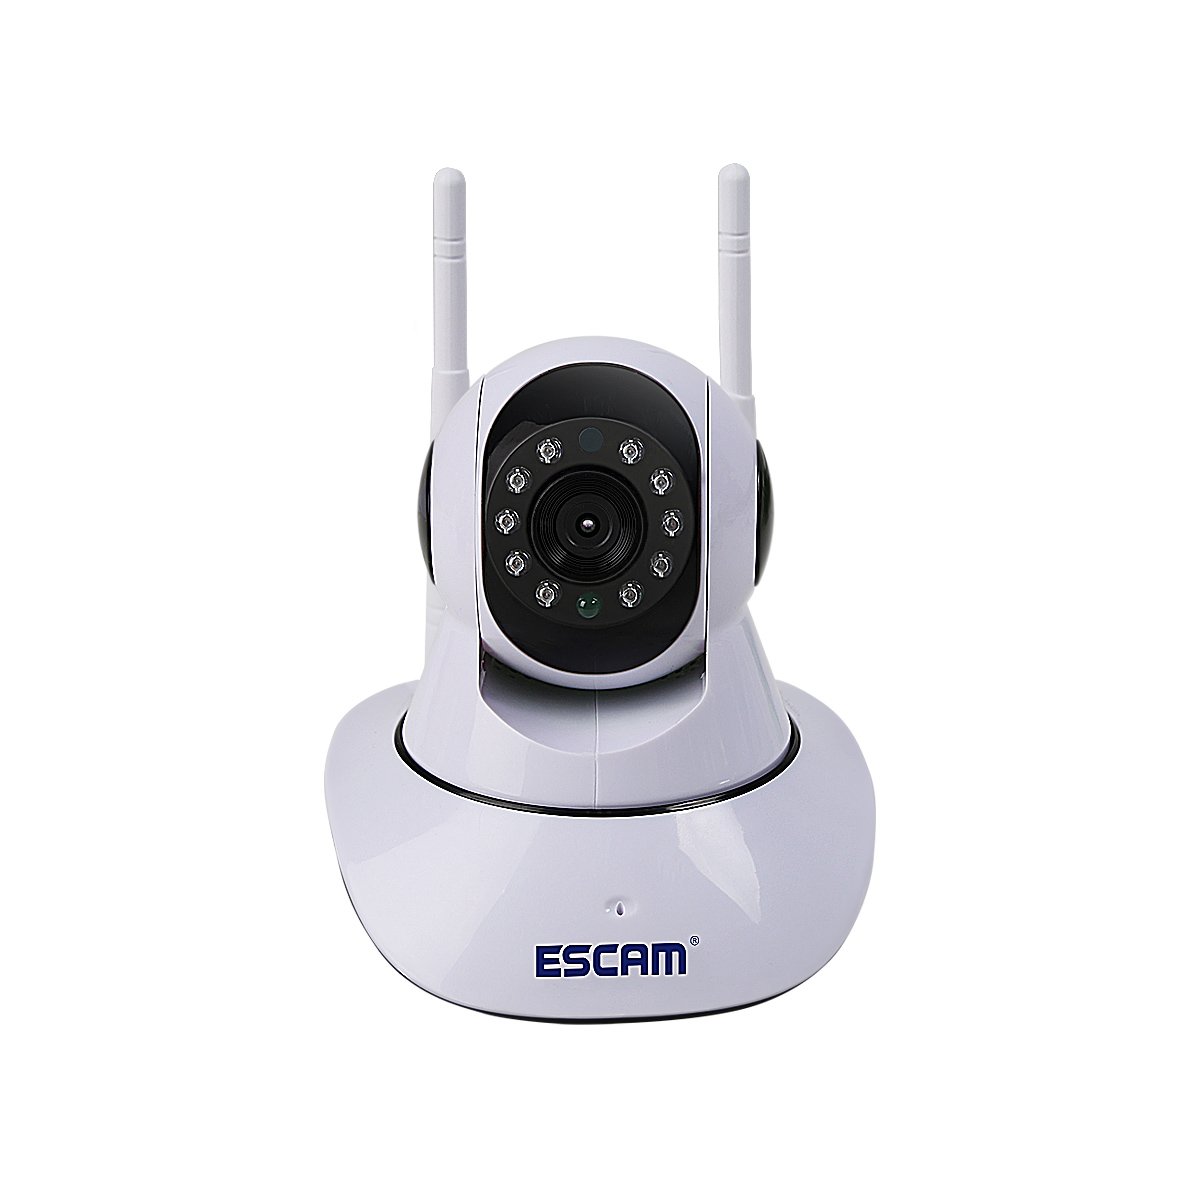 ESCAM G02 Dual Antenna 720P Pan/Tilt WiFi IP IR Camera Support ONVIF Max Up to 128GB Video Monitor 1